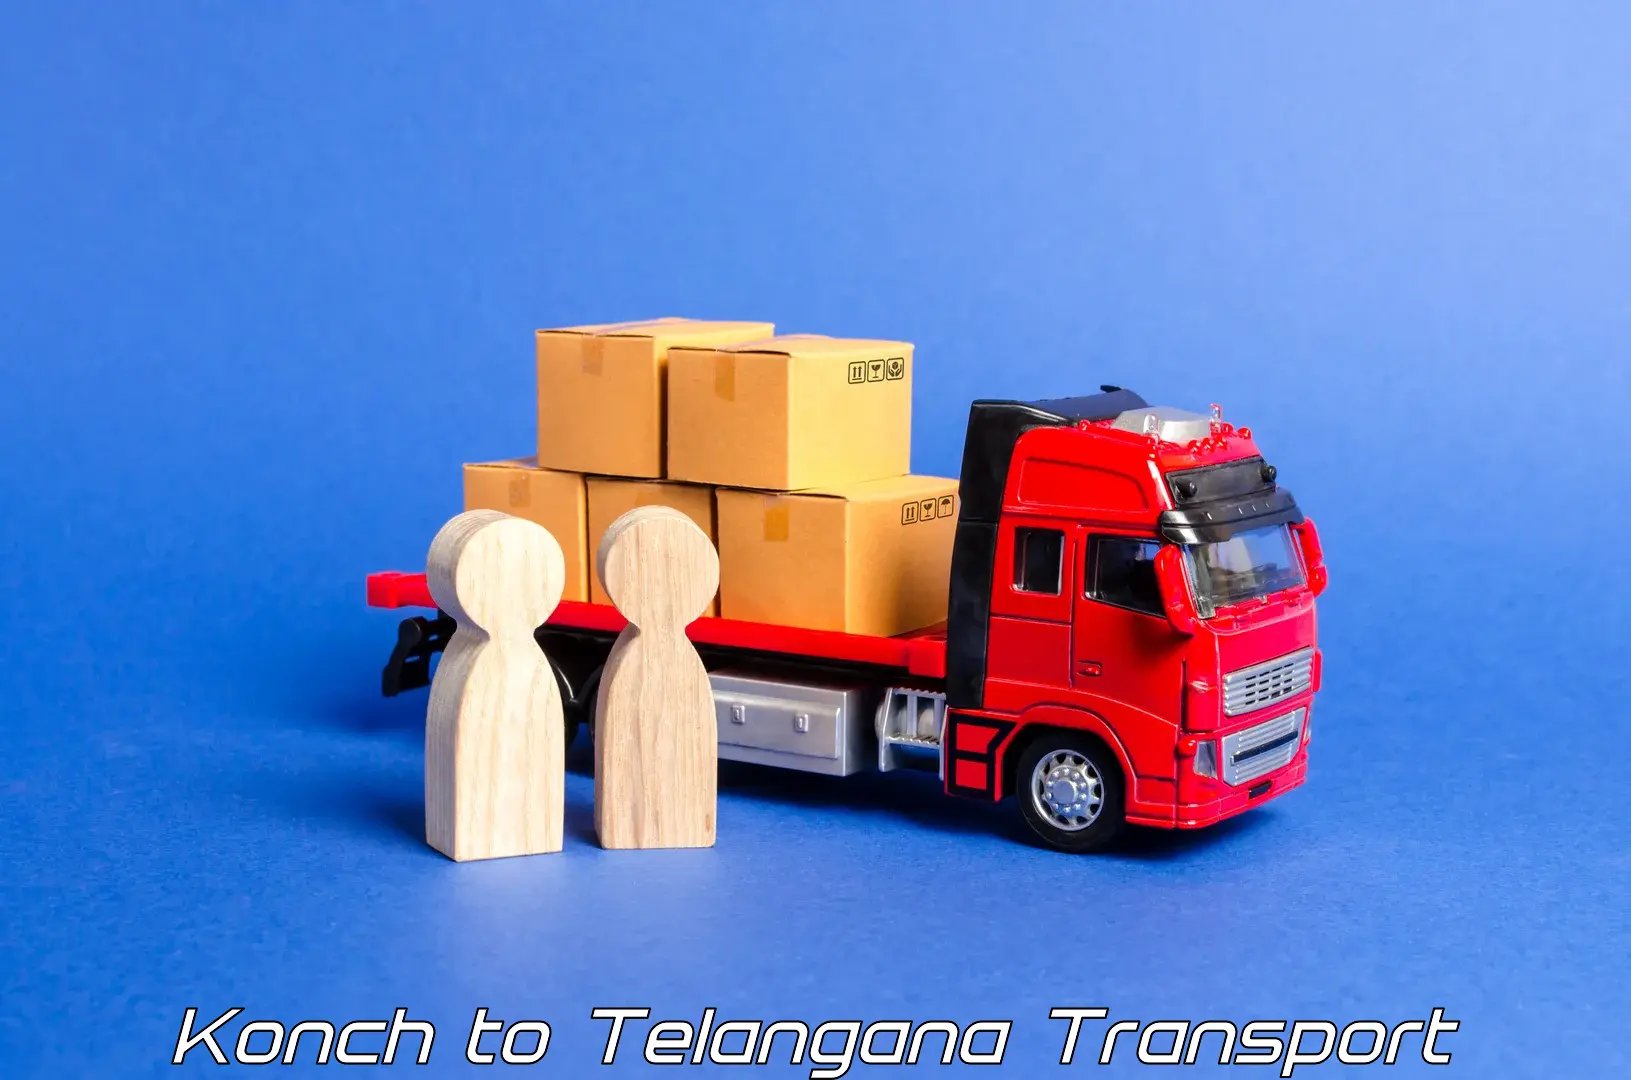 Express transport services Konch to Tallada